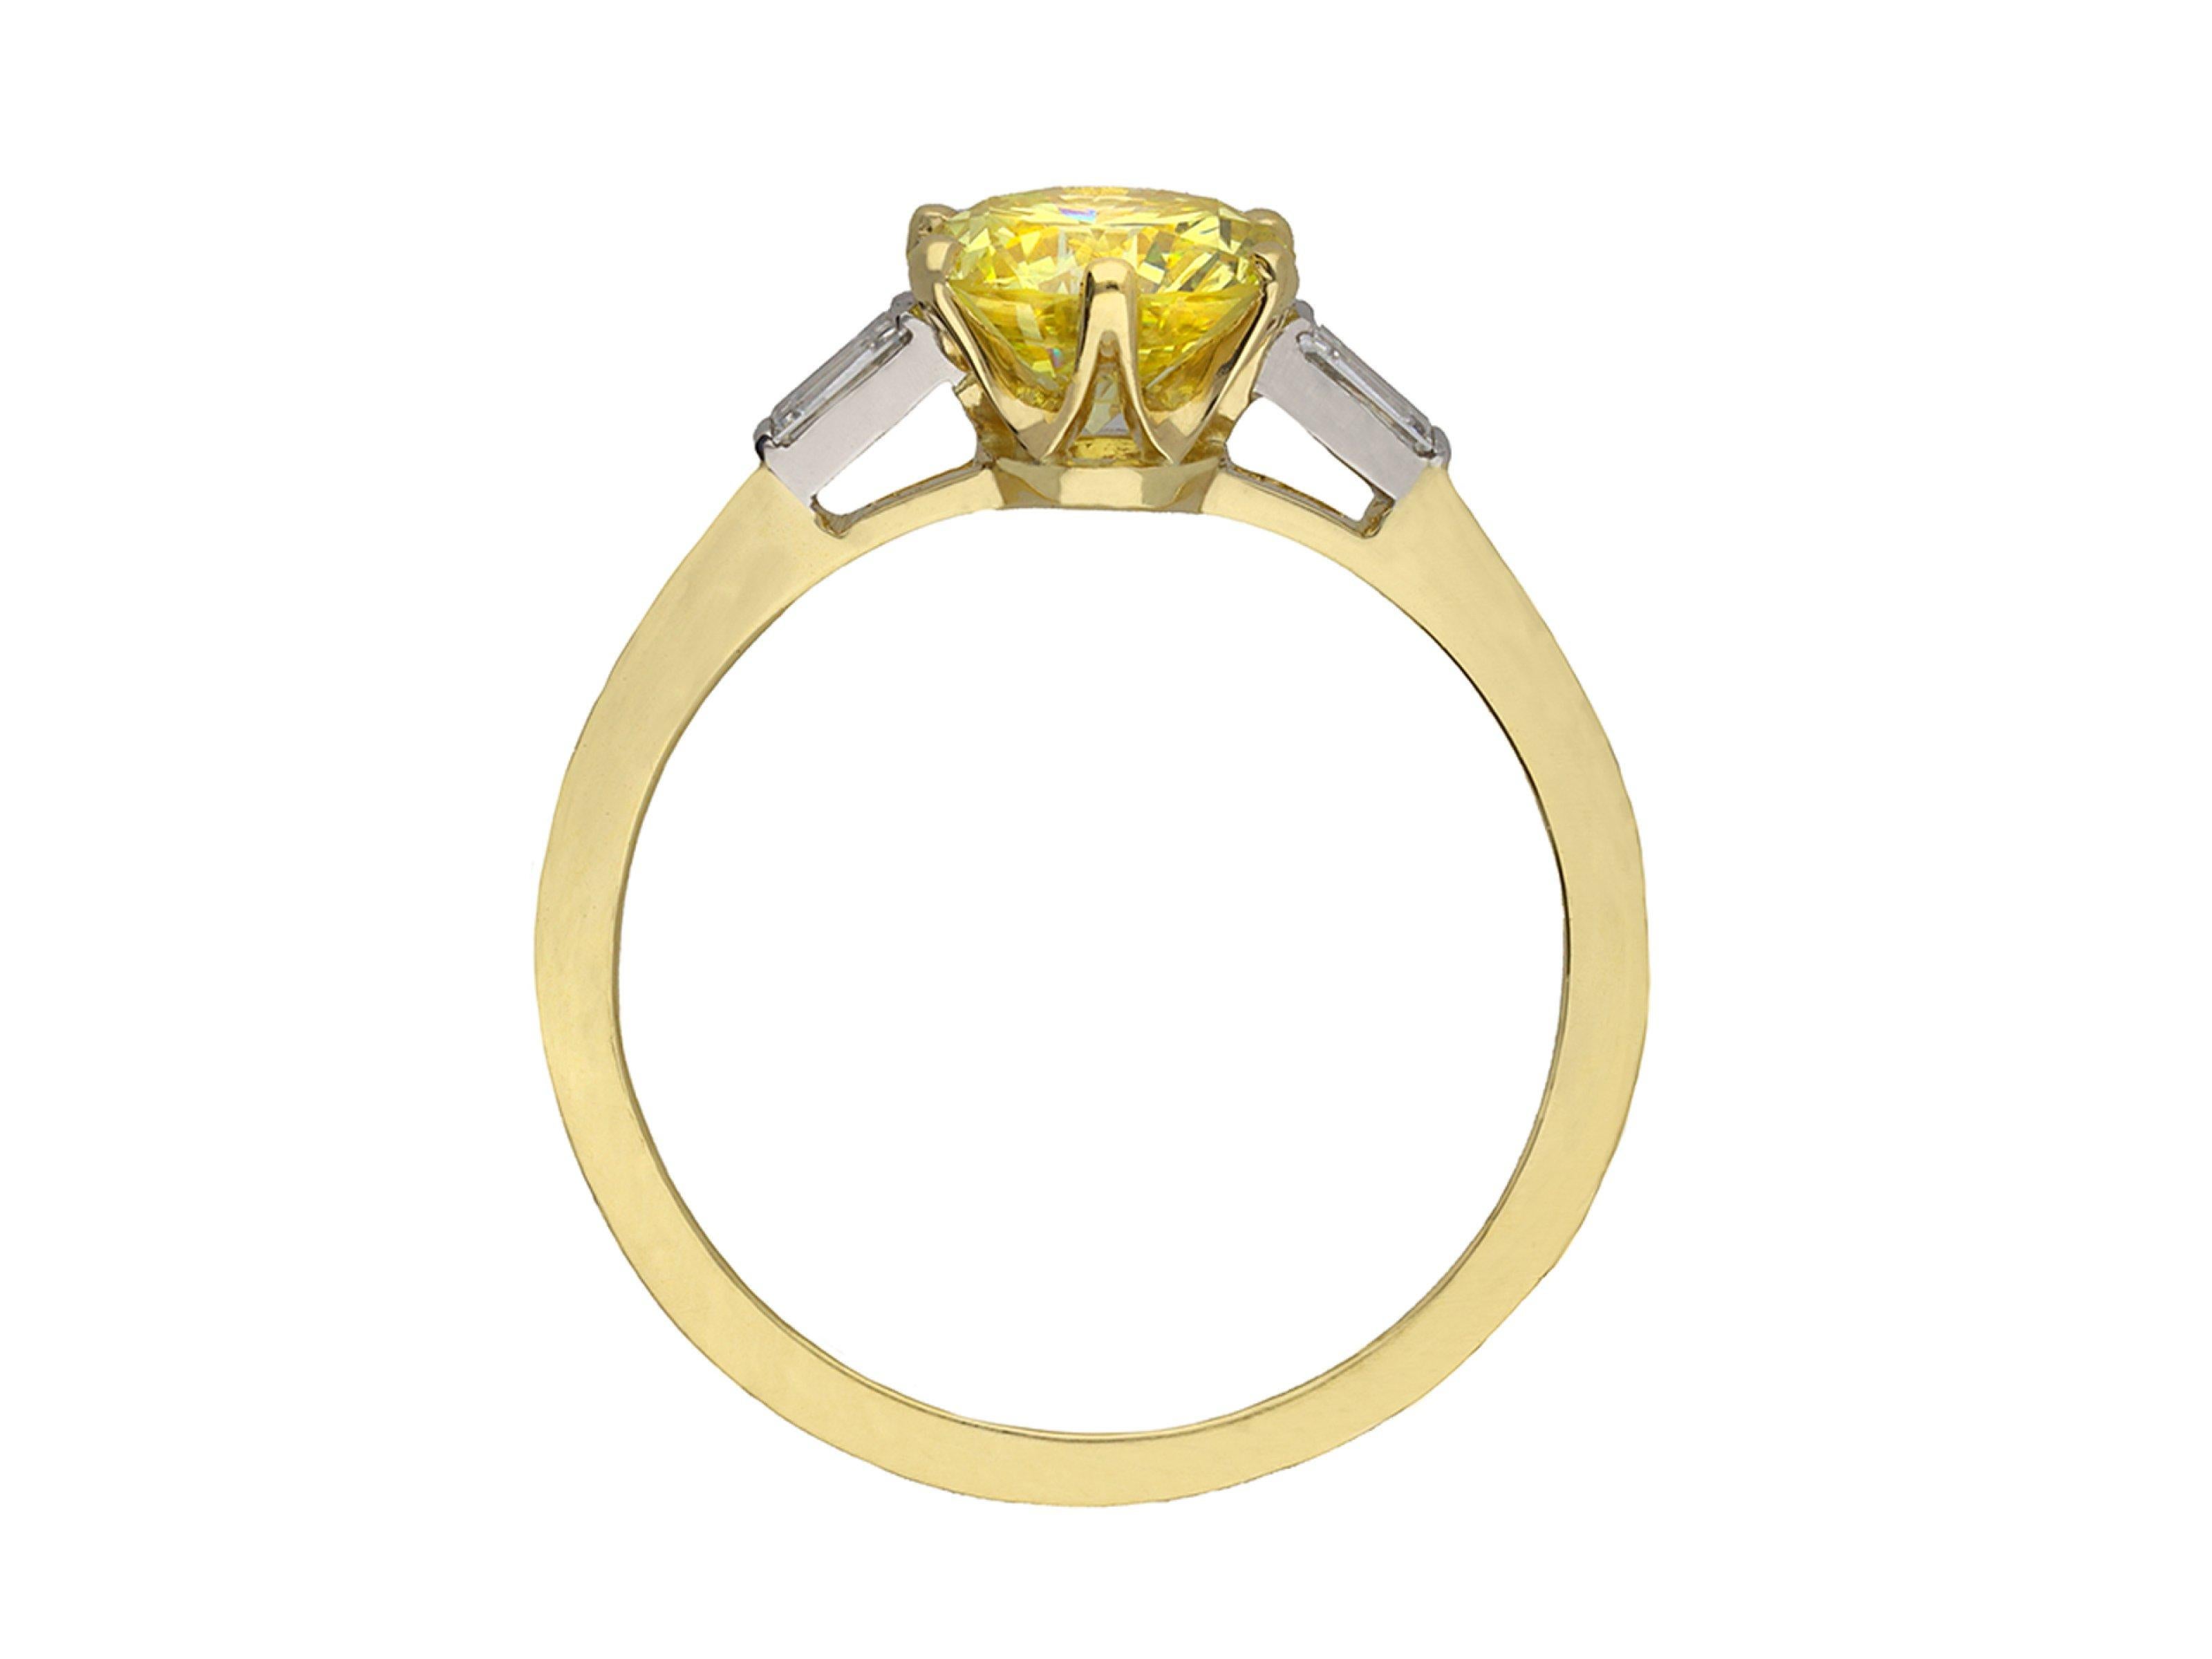 Fancy yellow diamond flanked solitaire ring. Set to center with a round transitional cut natural unenhanced fancy intense yellow diamond, SI2 clarity, with a weight of 1.10 carats, in open back claw settings, flanked by two tapered baguette cut